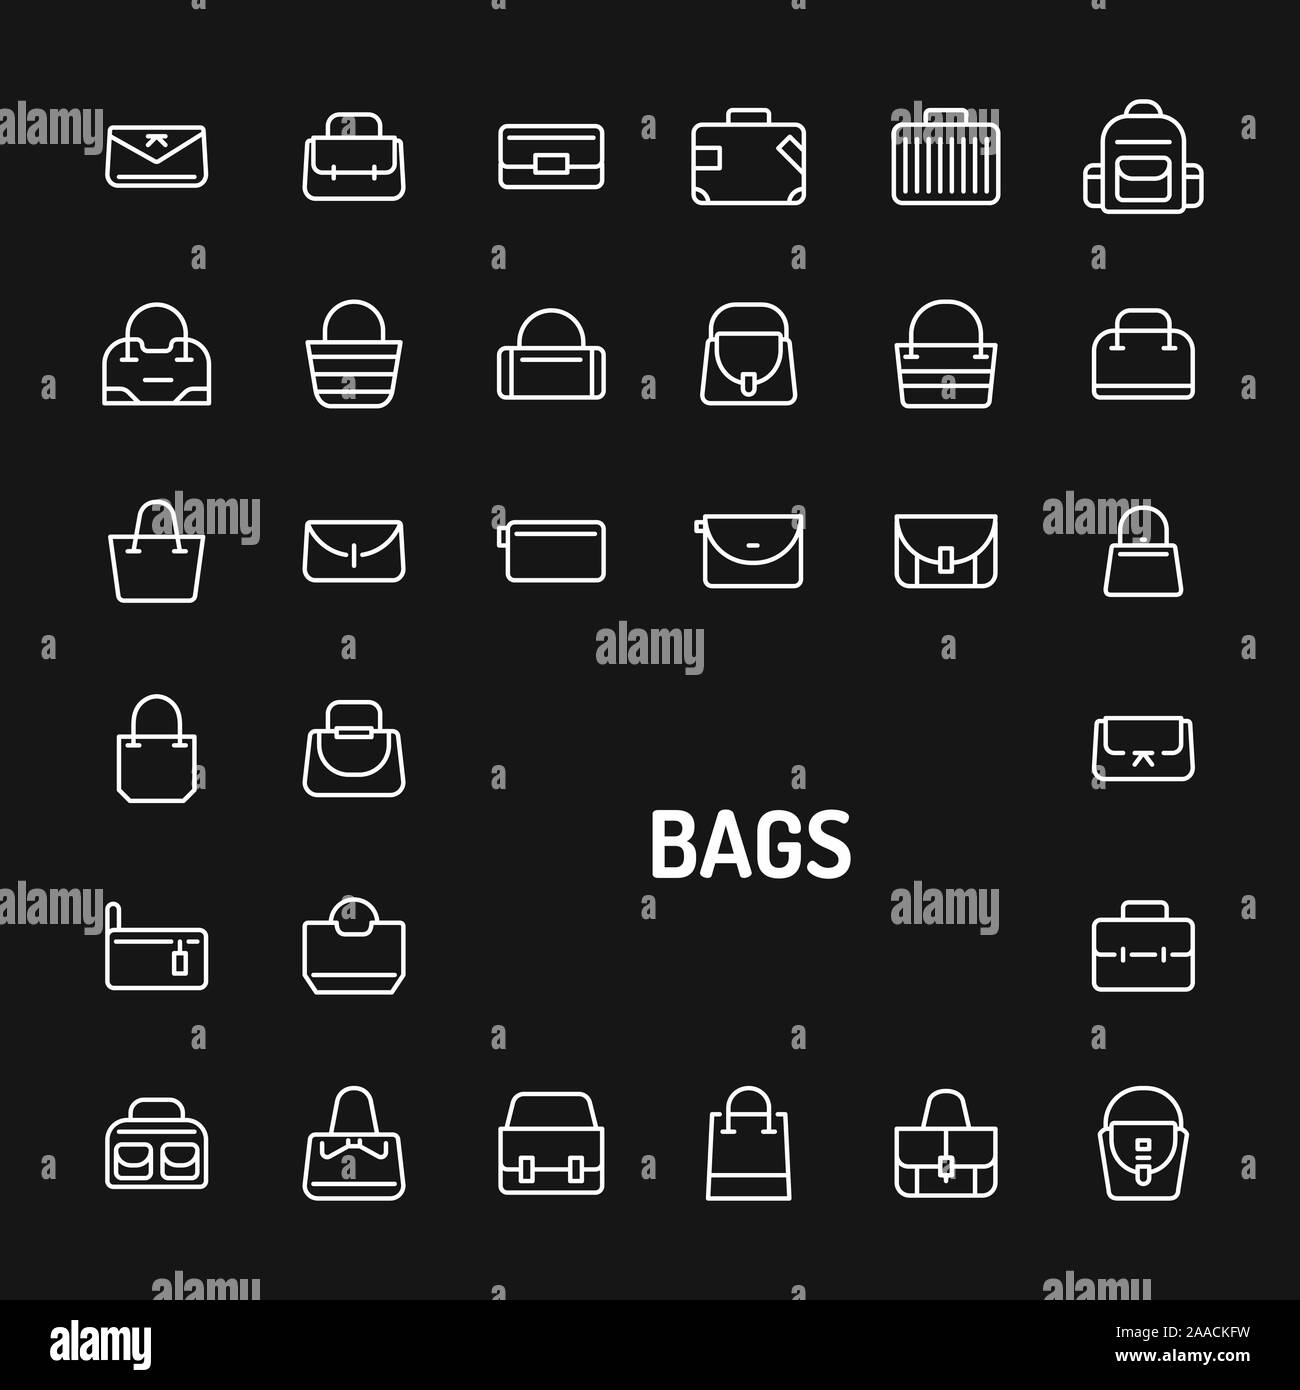 Simple white line icons isolated over black background related to bags, pouches and suitcase for fashion. Vector signs and symbols collections for web Stock Vector